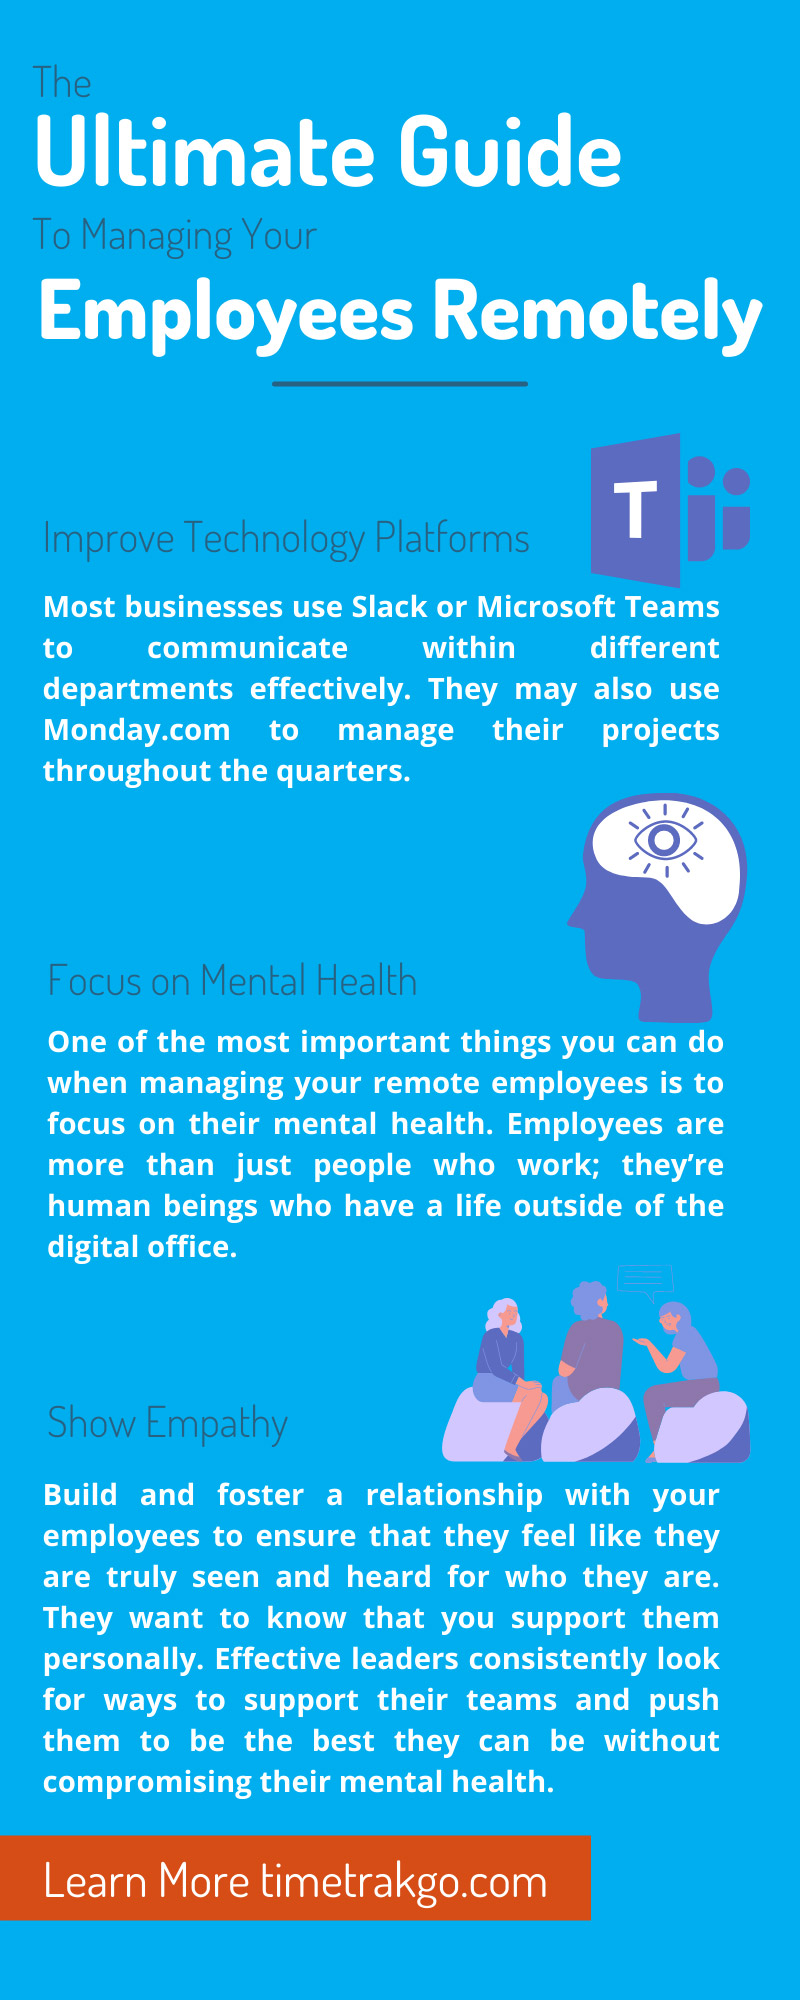 The Ultimate Guide To Managing Your Employees Remotely